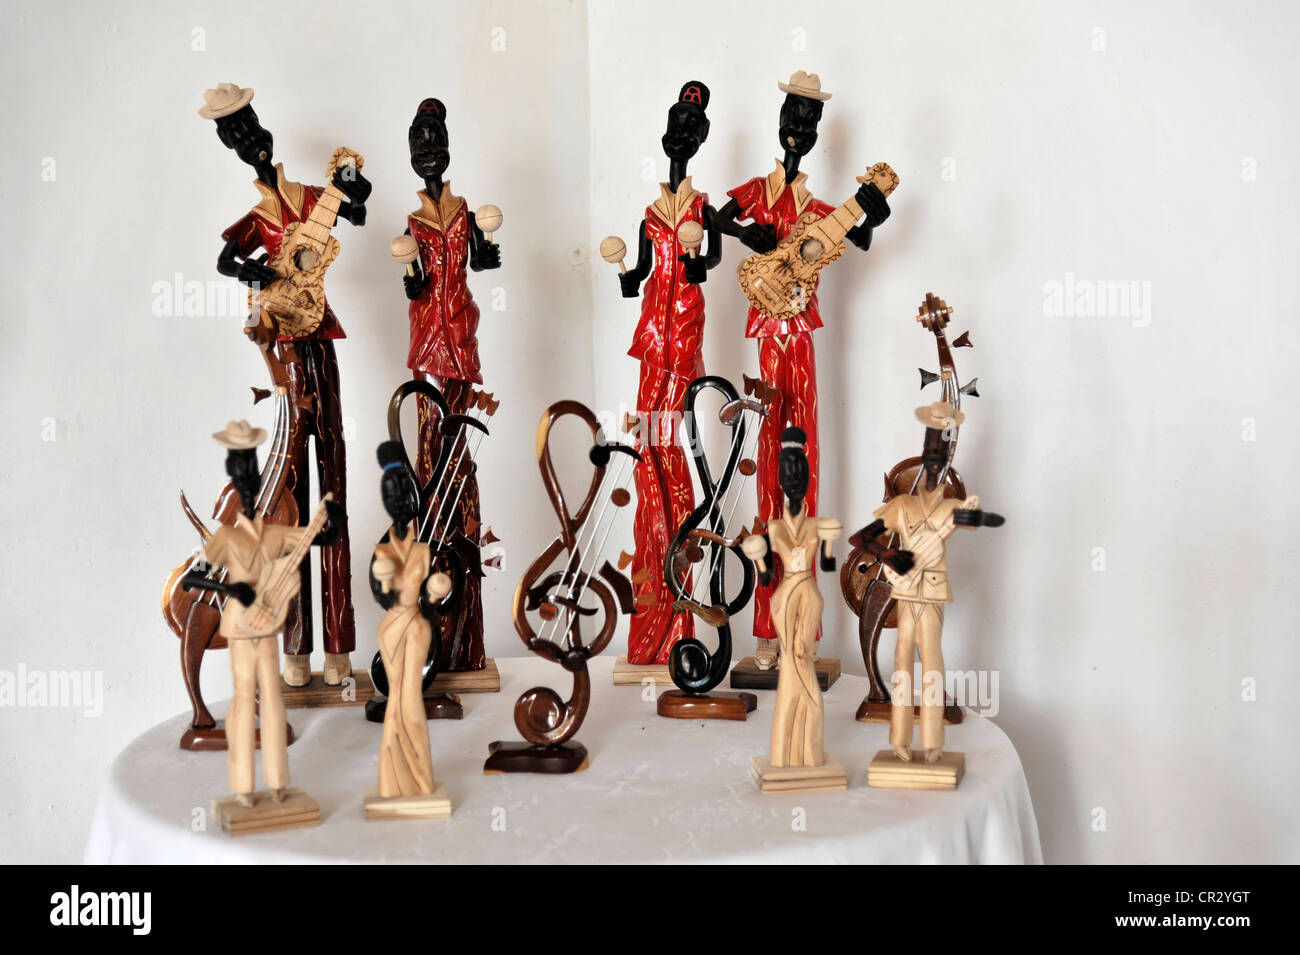 Musicians, music group, carved in wood, souvenirs, Trinidad, Cuba, Greater Antilles, Caribbean, Central America, America Stock Photo